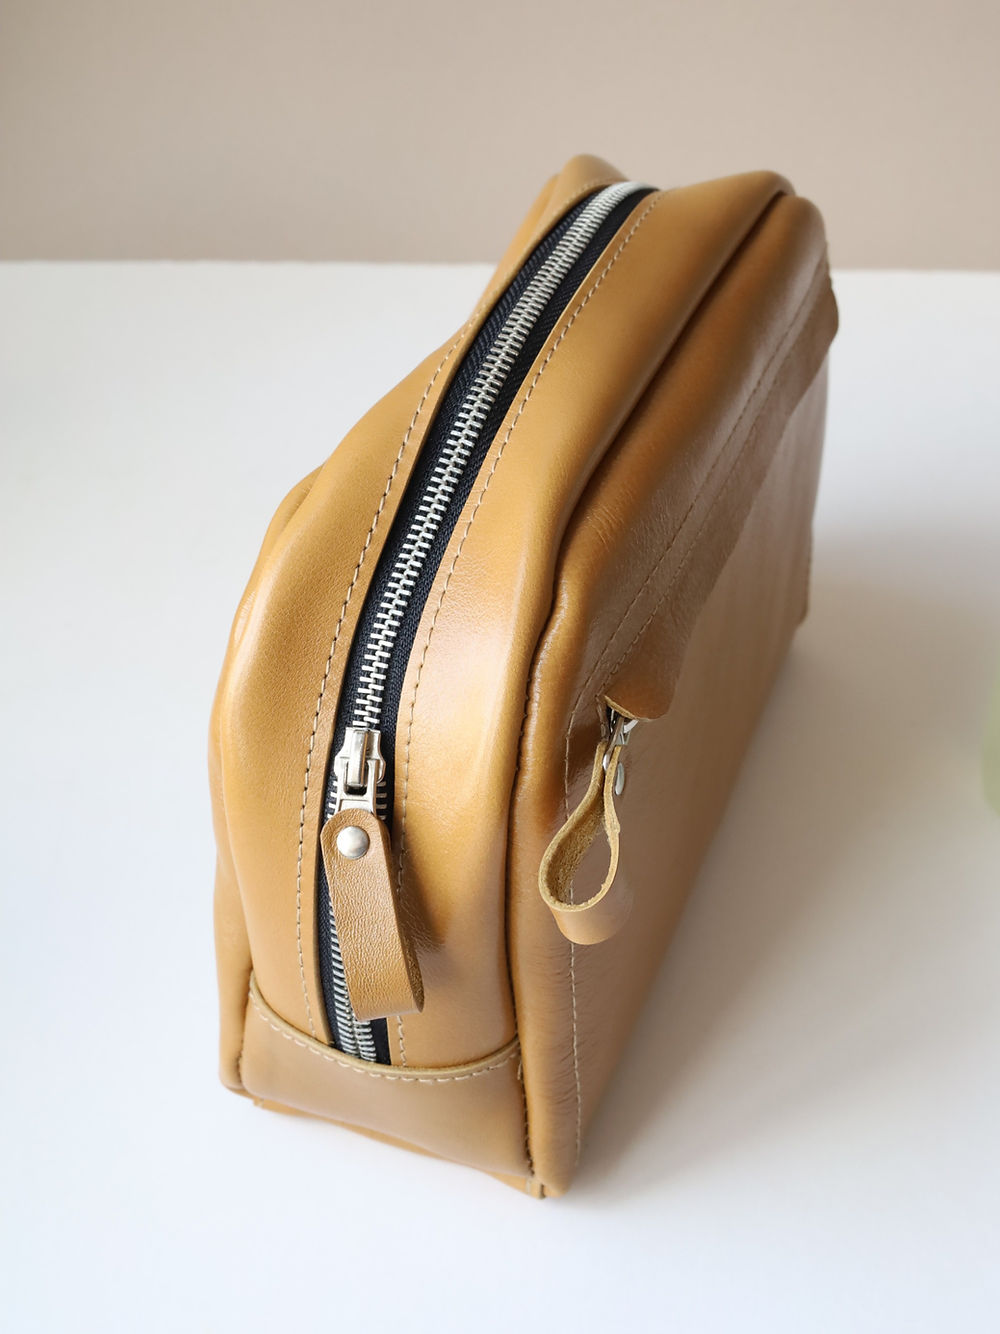 A DOUGLAS Toiletry Bag - Mustard sitting on a table.